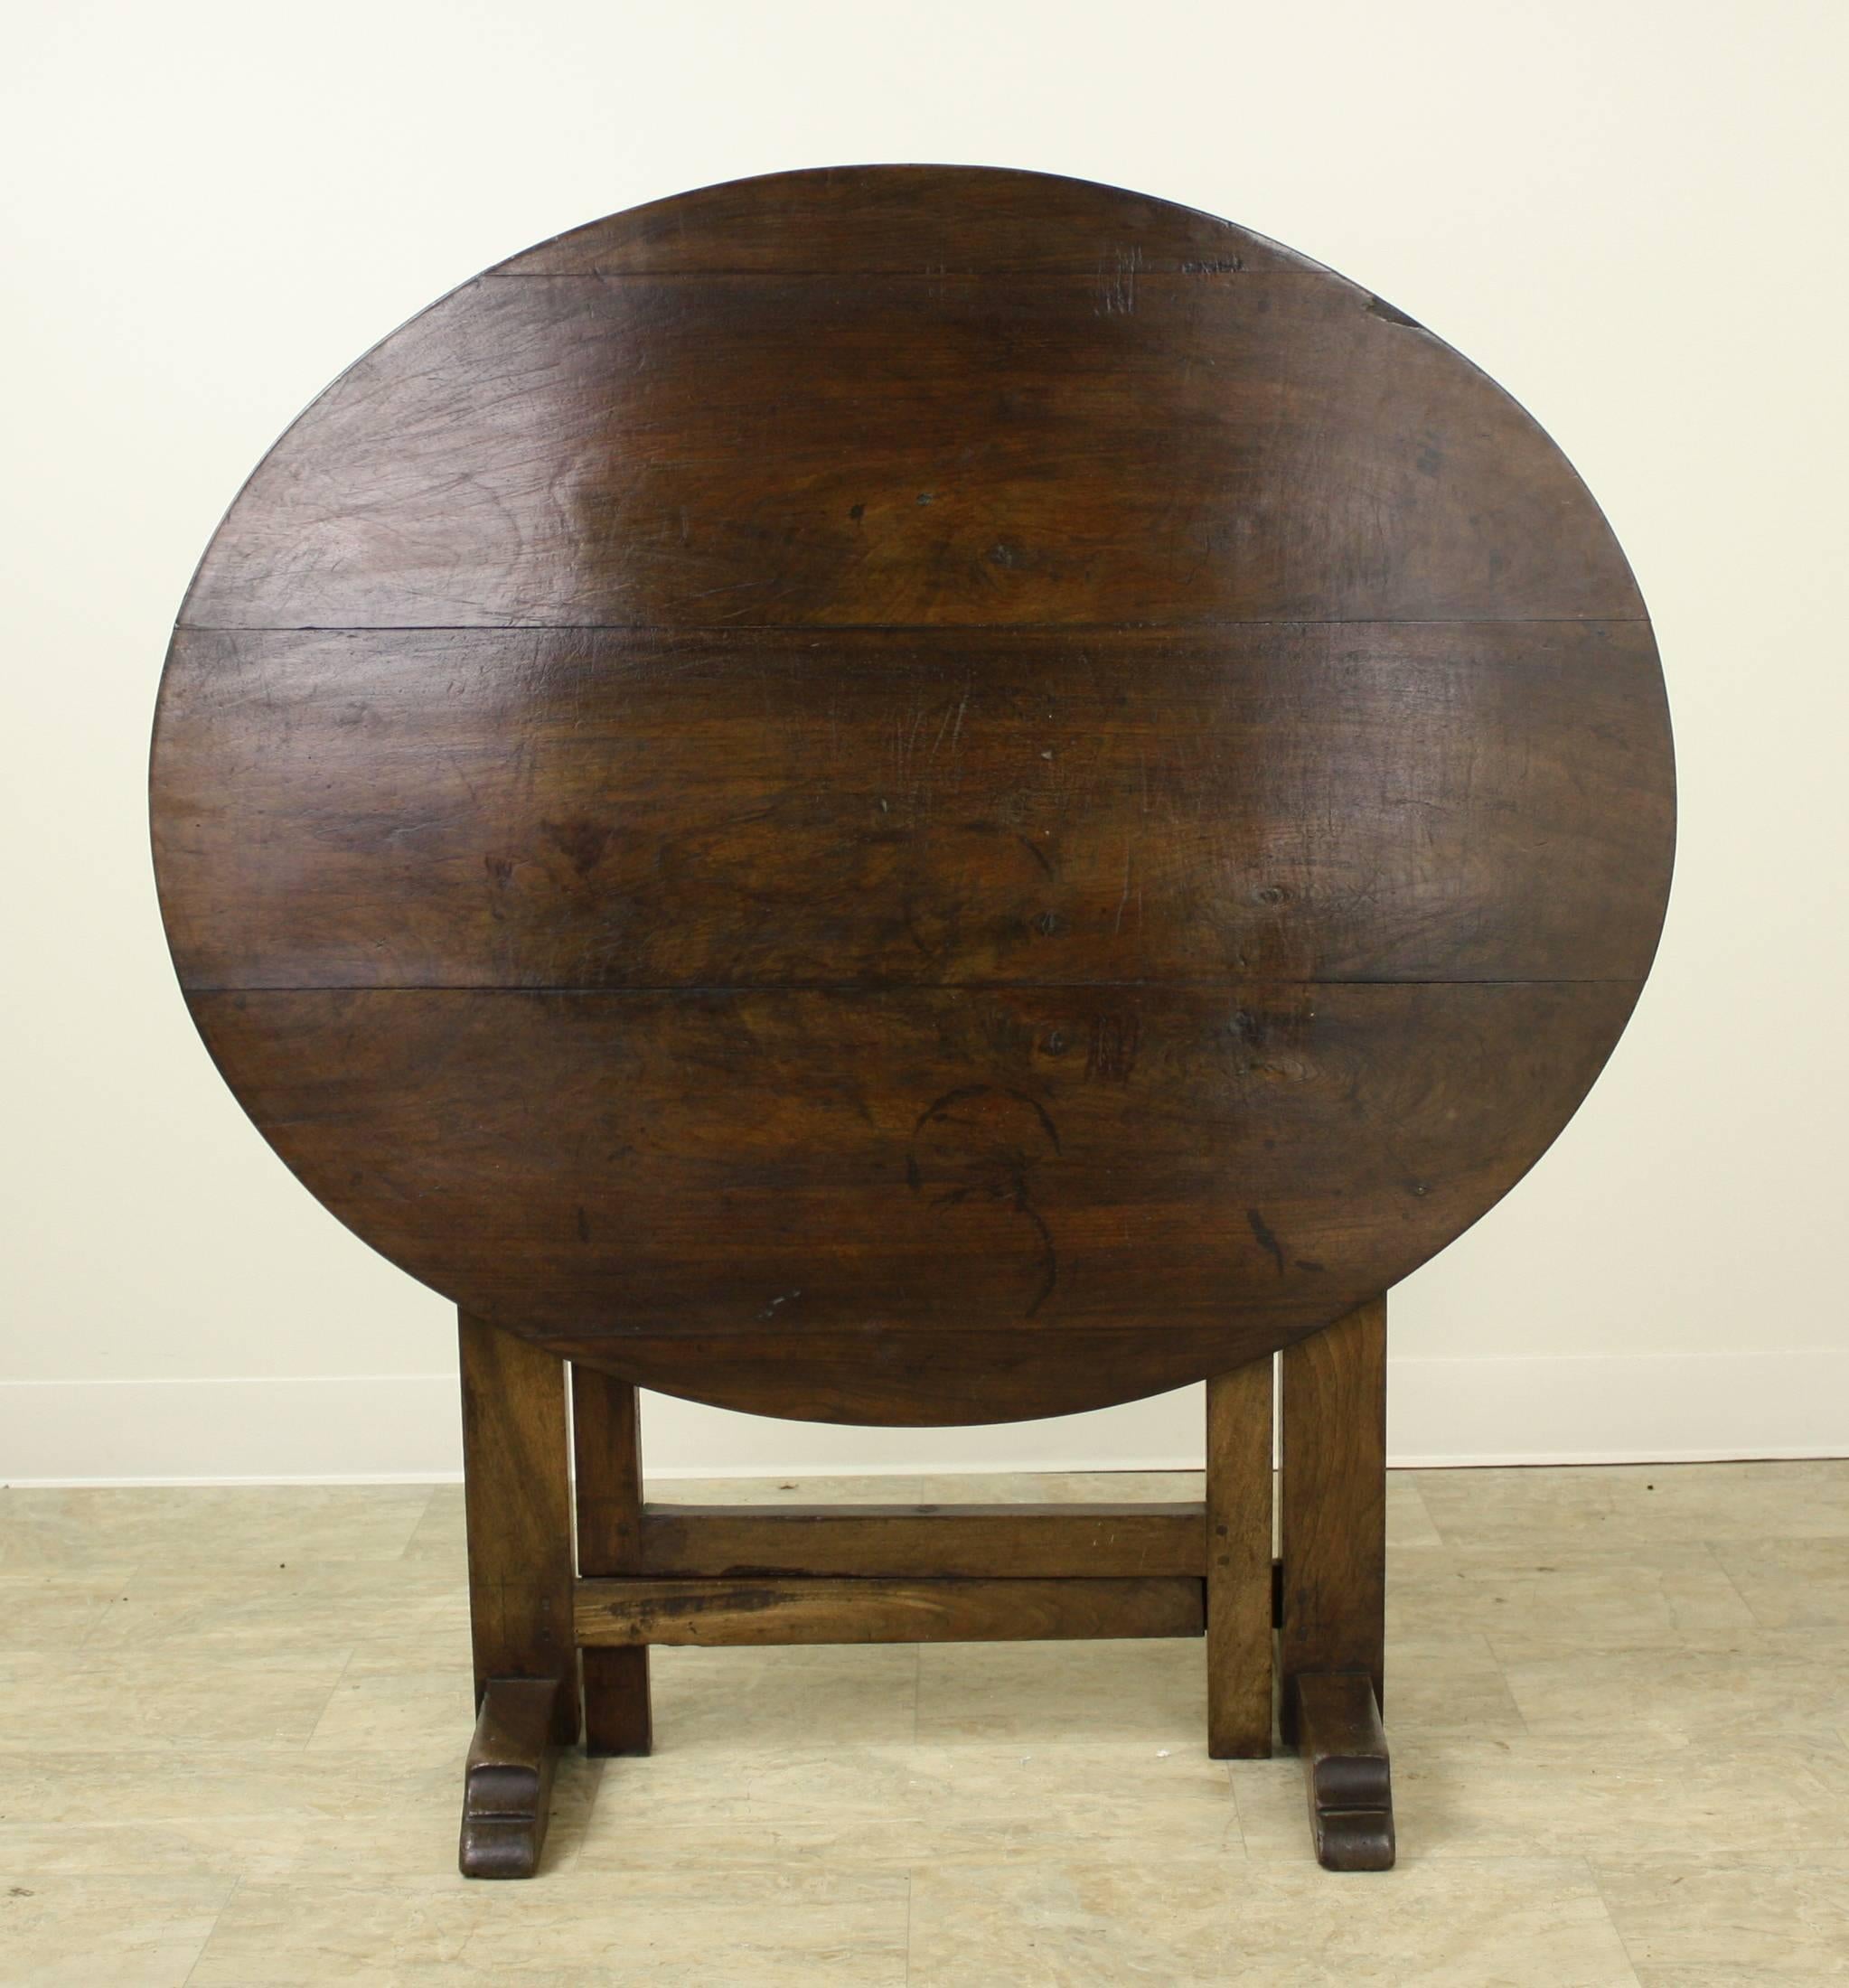 Charming smaller dining table, or breakfast table. A rich walnut hue allows the attractive grain to show. The legs' sledge feet allow the table to be strong and sturdy and support the table top. As is traditional, this wine tasting table has a top